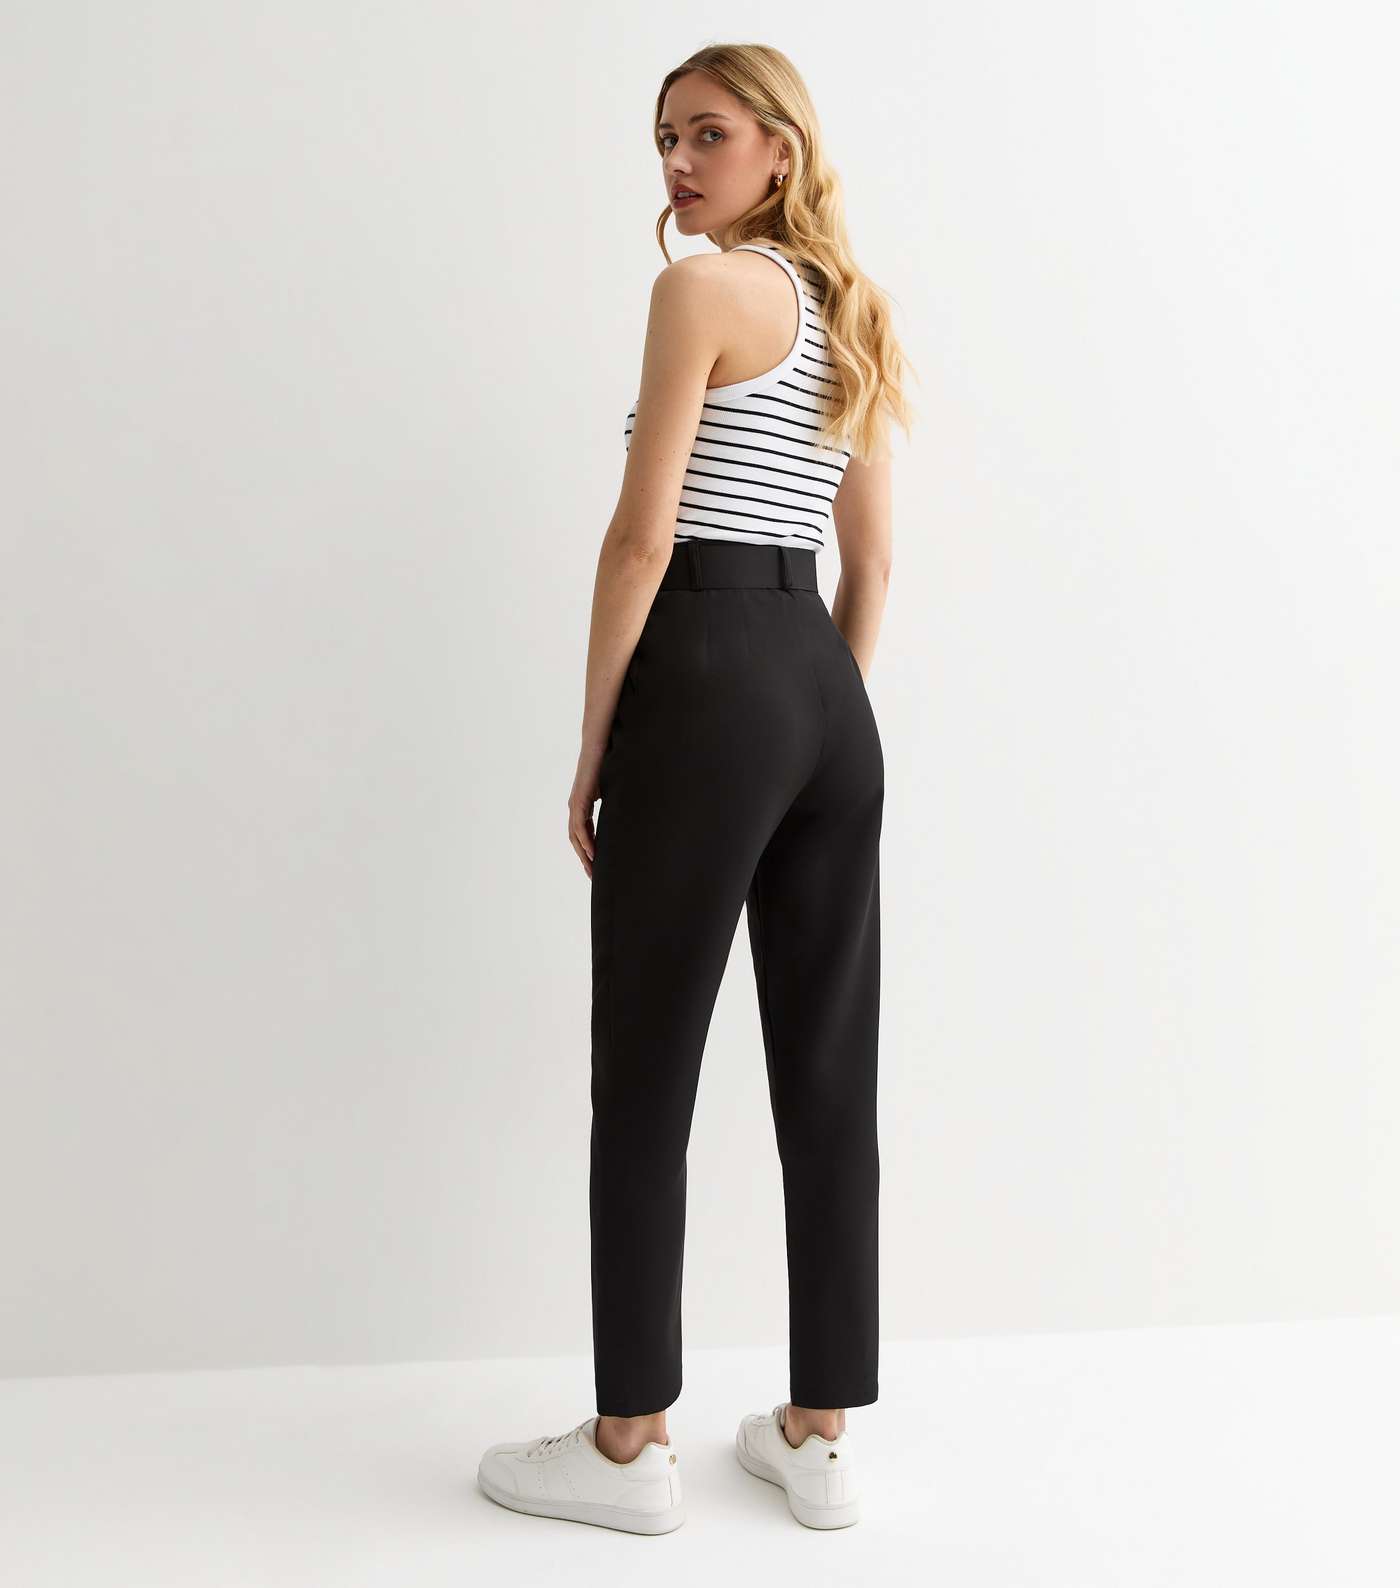 Gini London Black Tapered Trousers Image 4